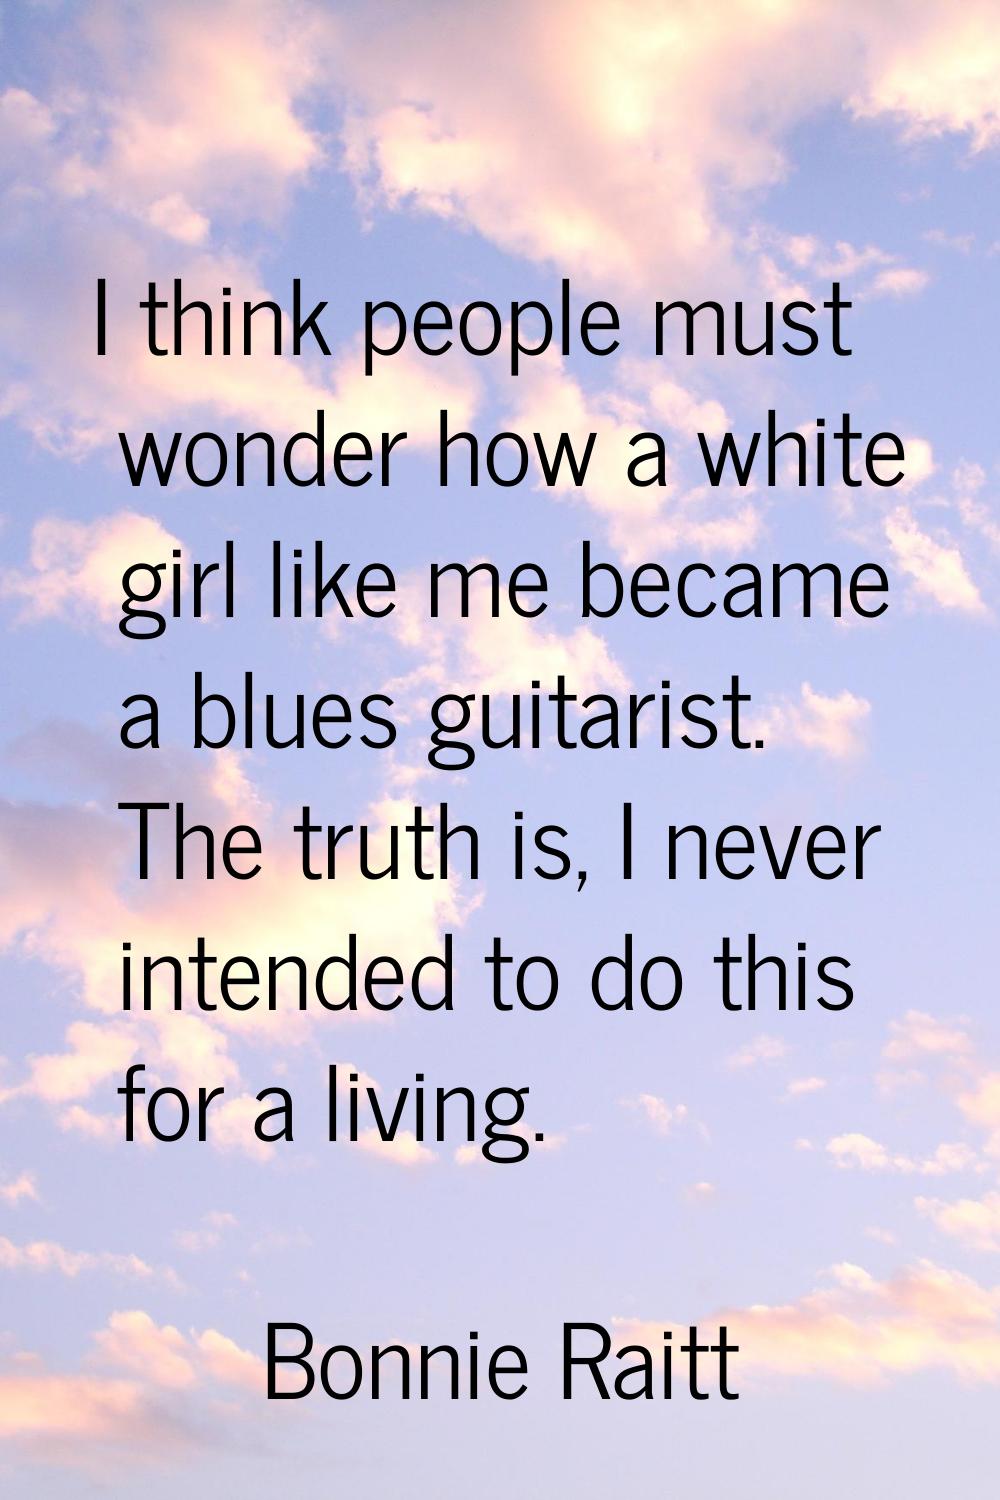 I think people must wonder how a white girl like me became a blues guitarist. The truth is, I never